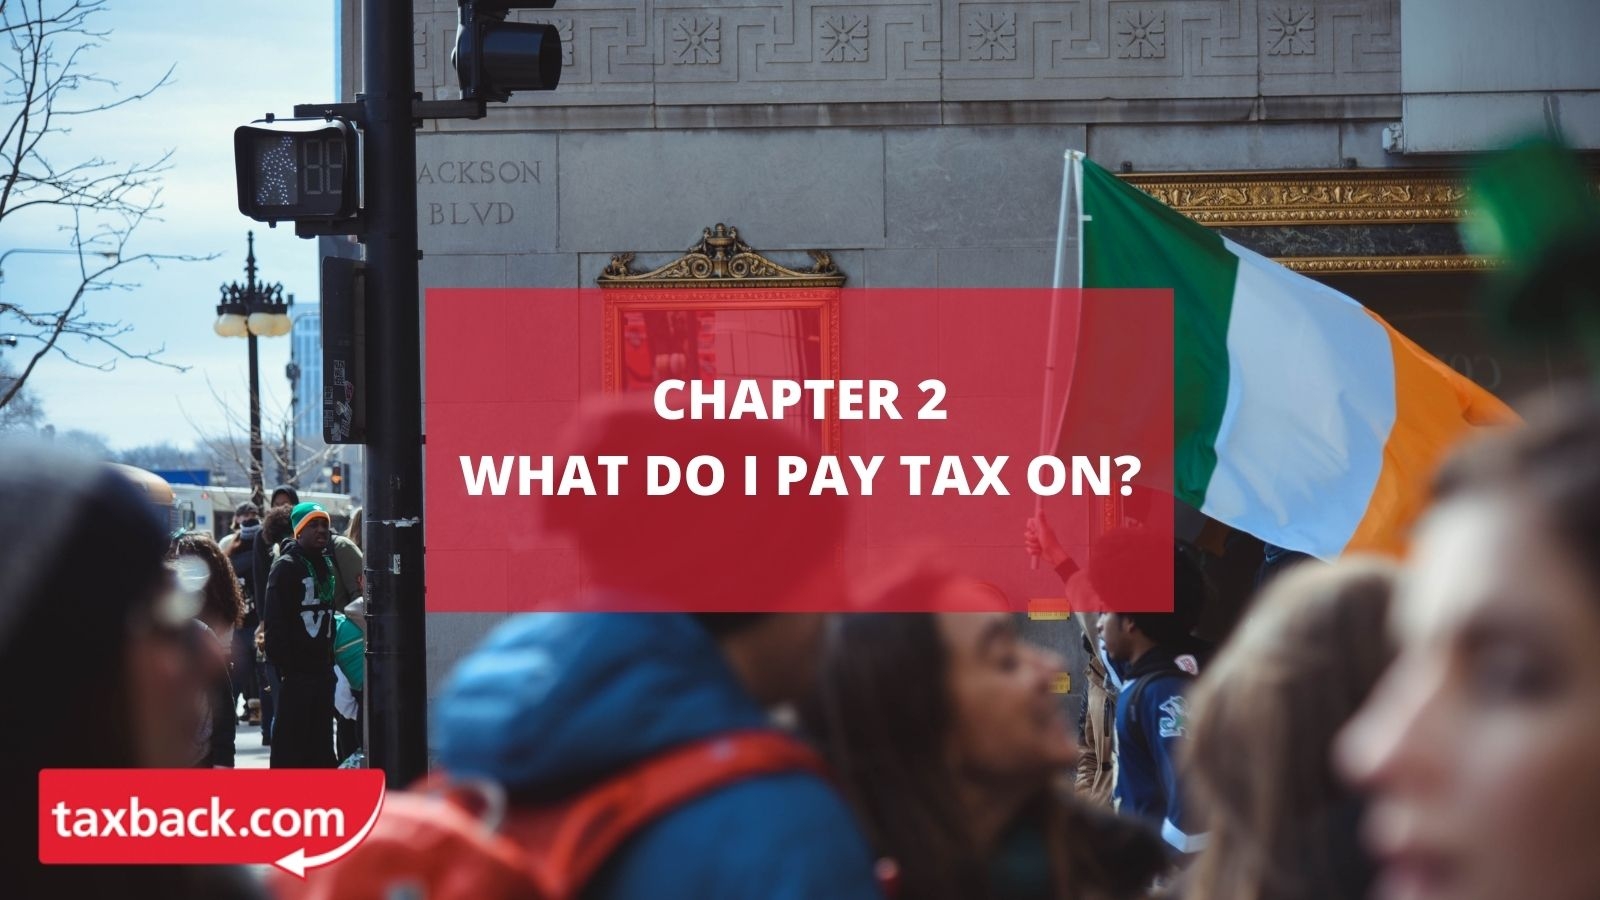 Chapter 2 - What do I pay tax on?